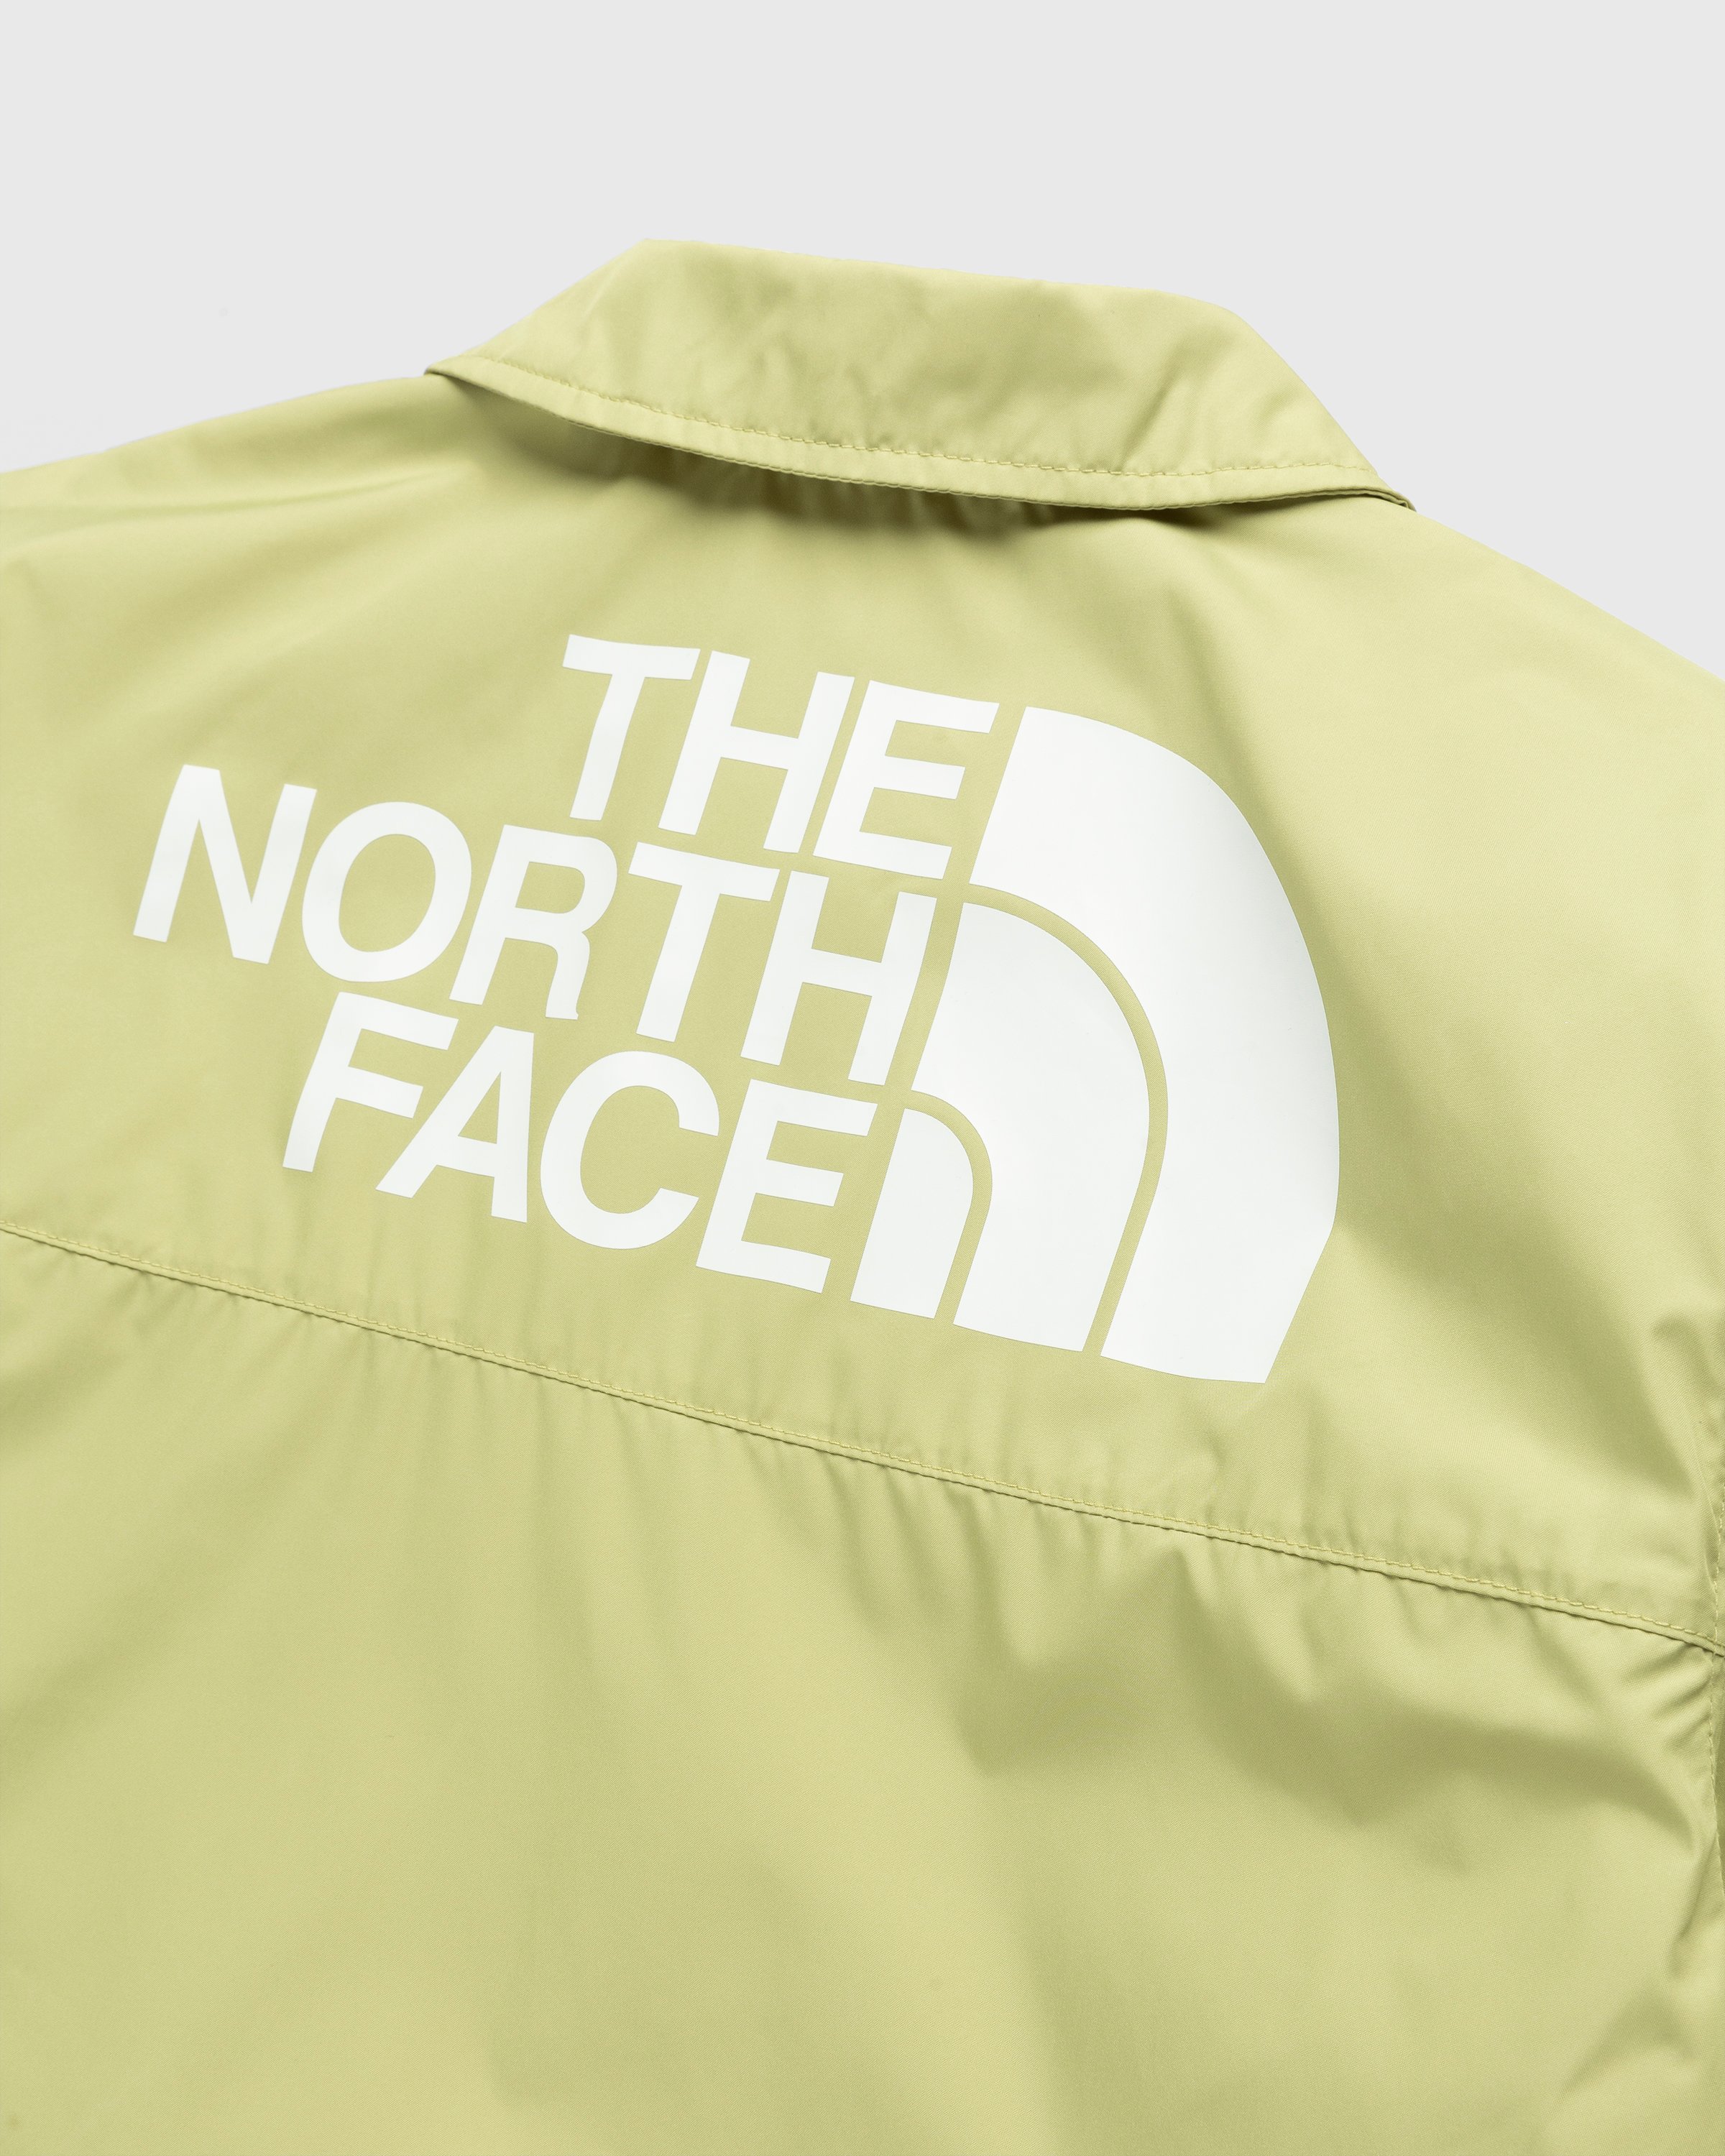 The North Face - Cyclone Coaches Jacket Weeping Willow - Clothing - Green - Image 3